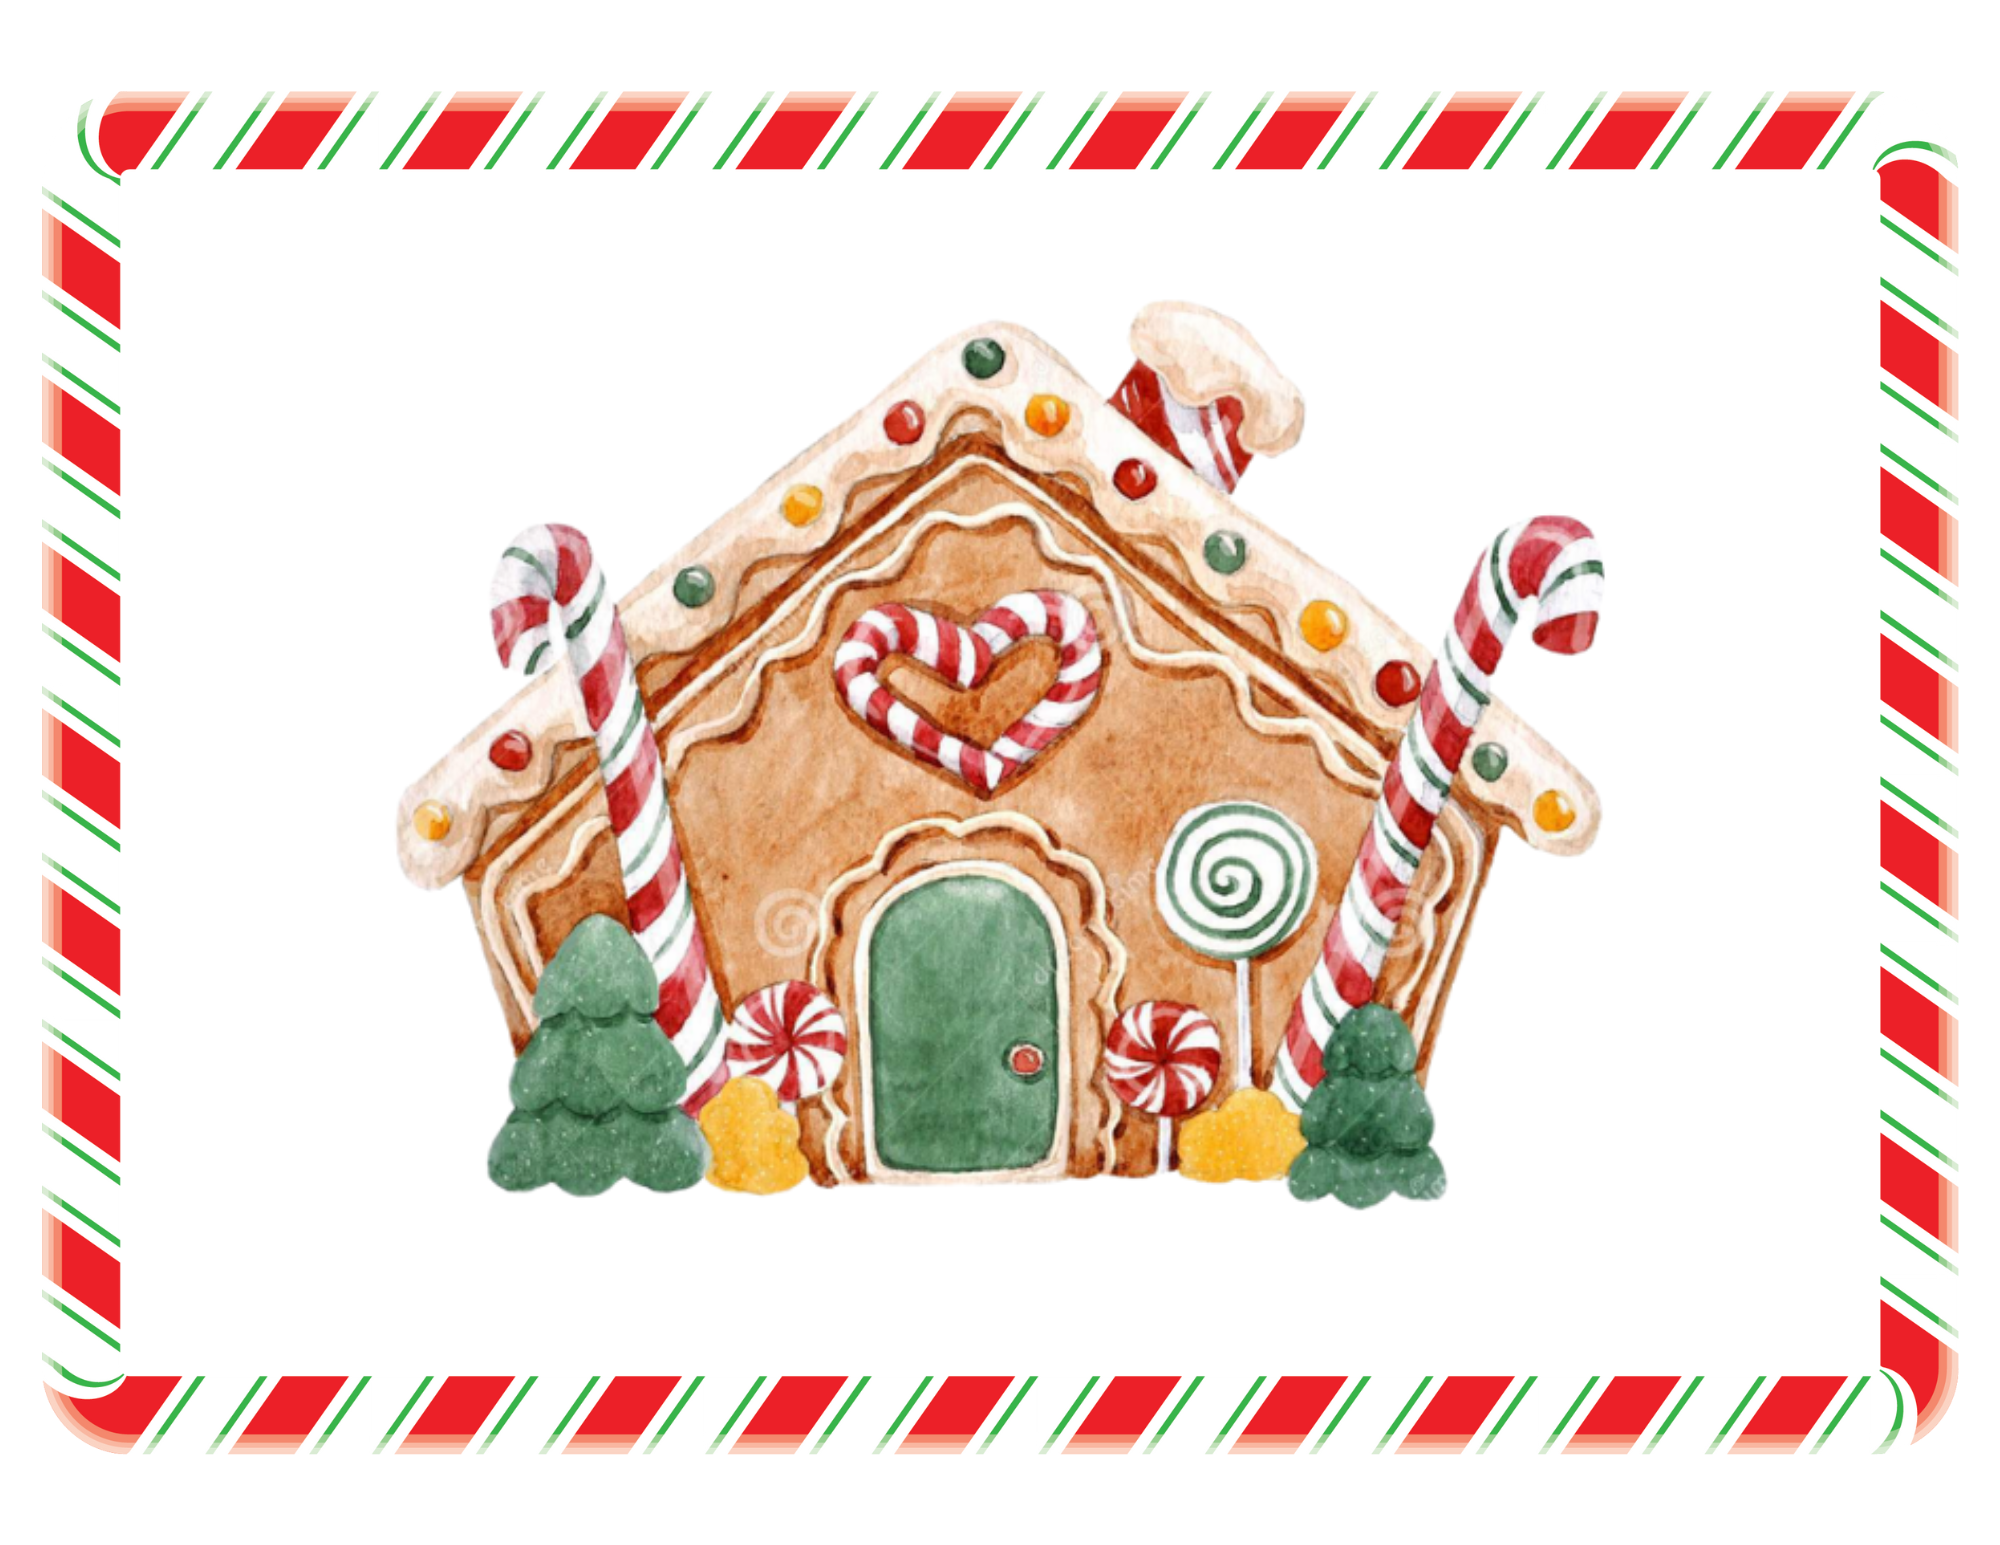 Candy House surrounded by candy cane border